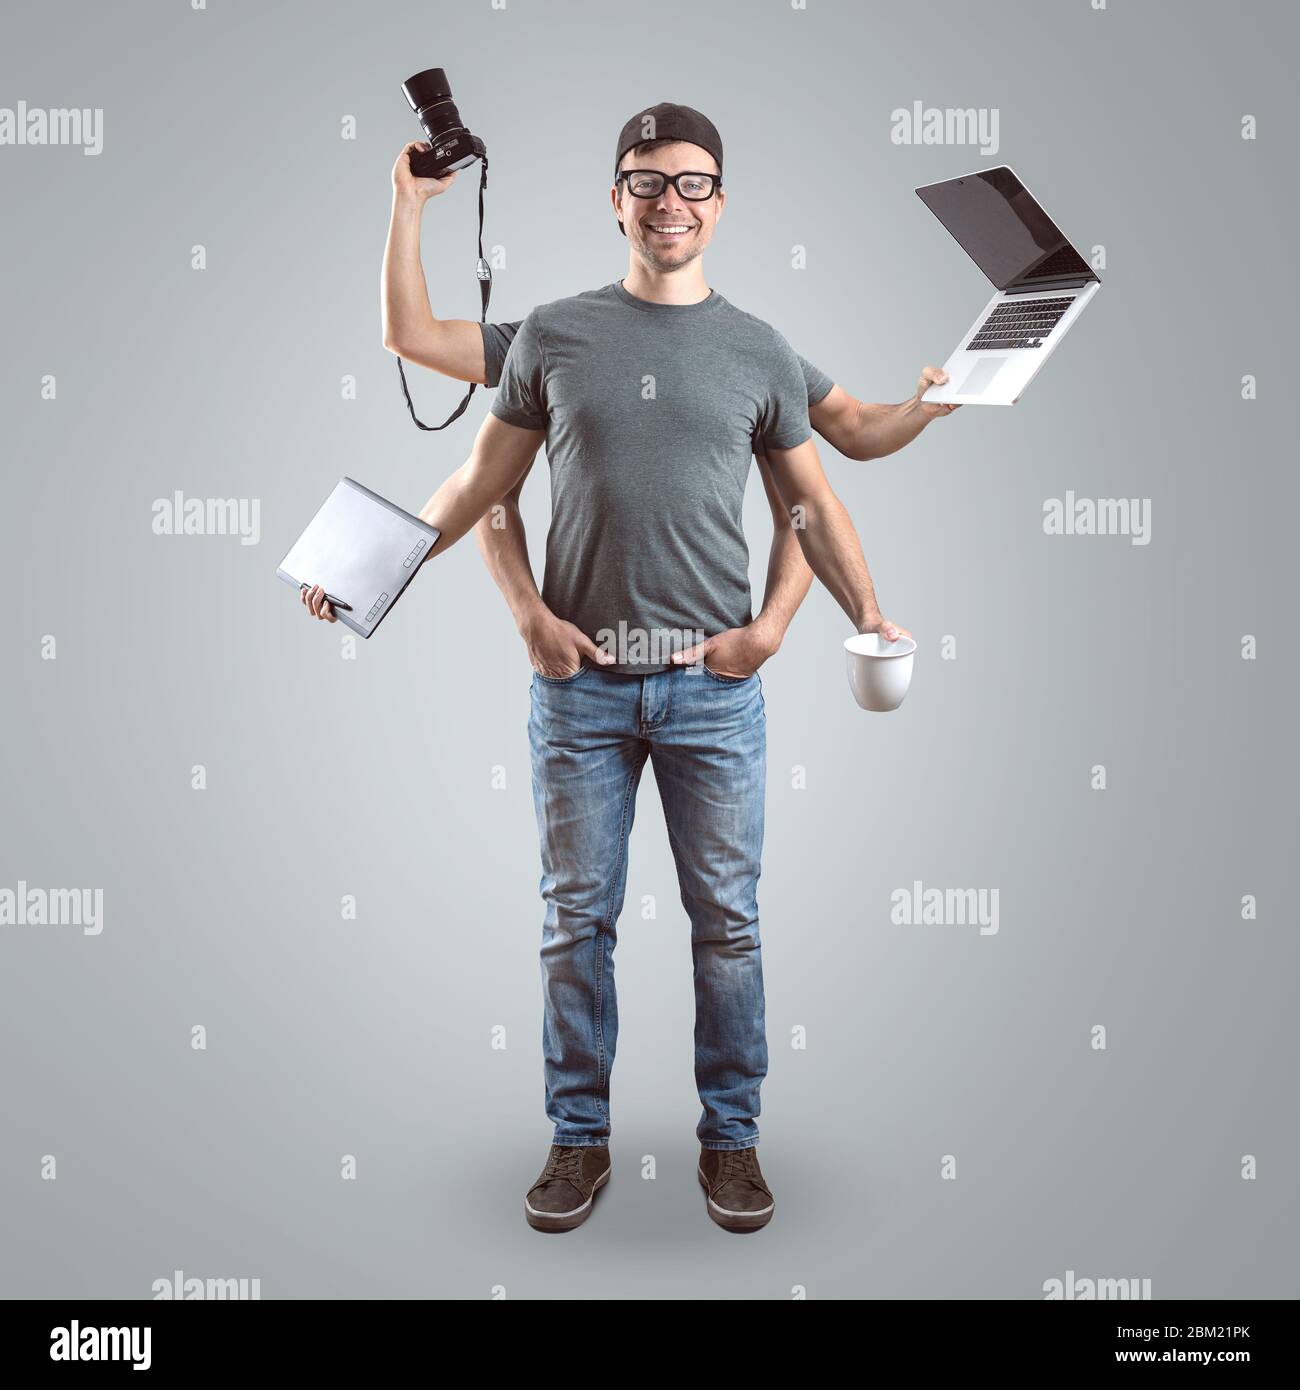 Funny designer with multiple arms Stock Photo